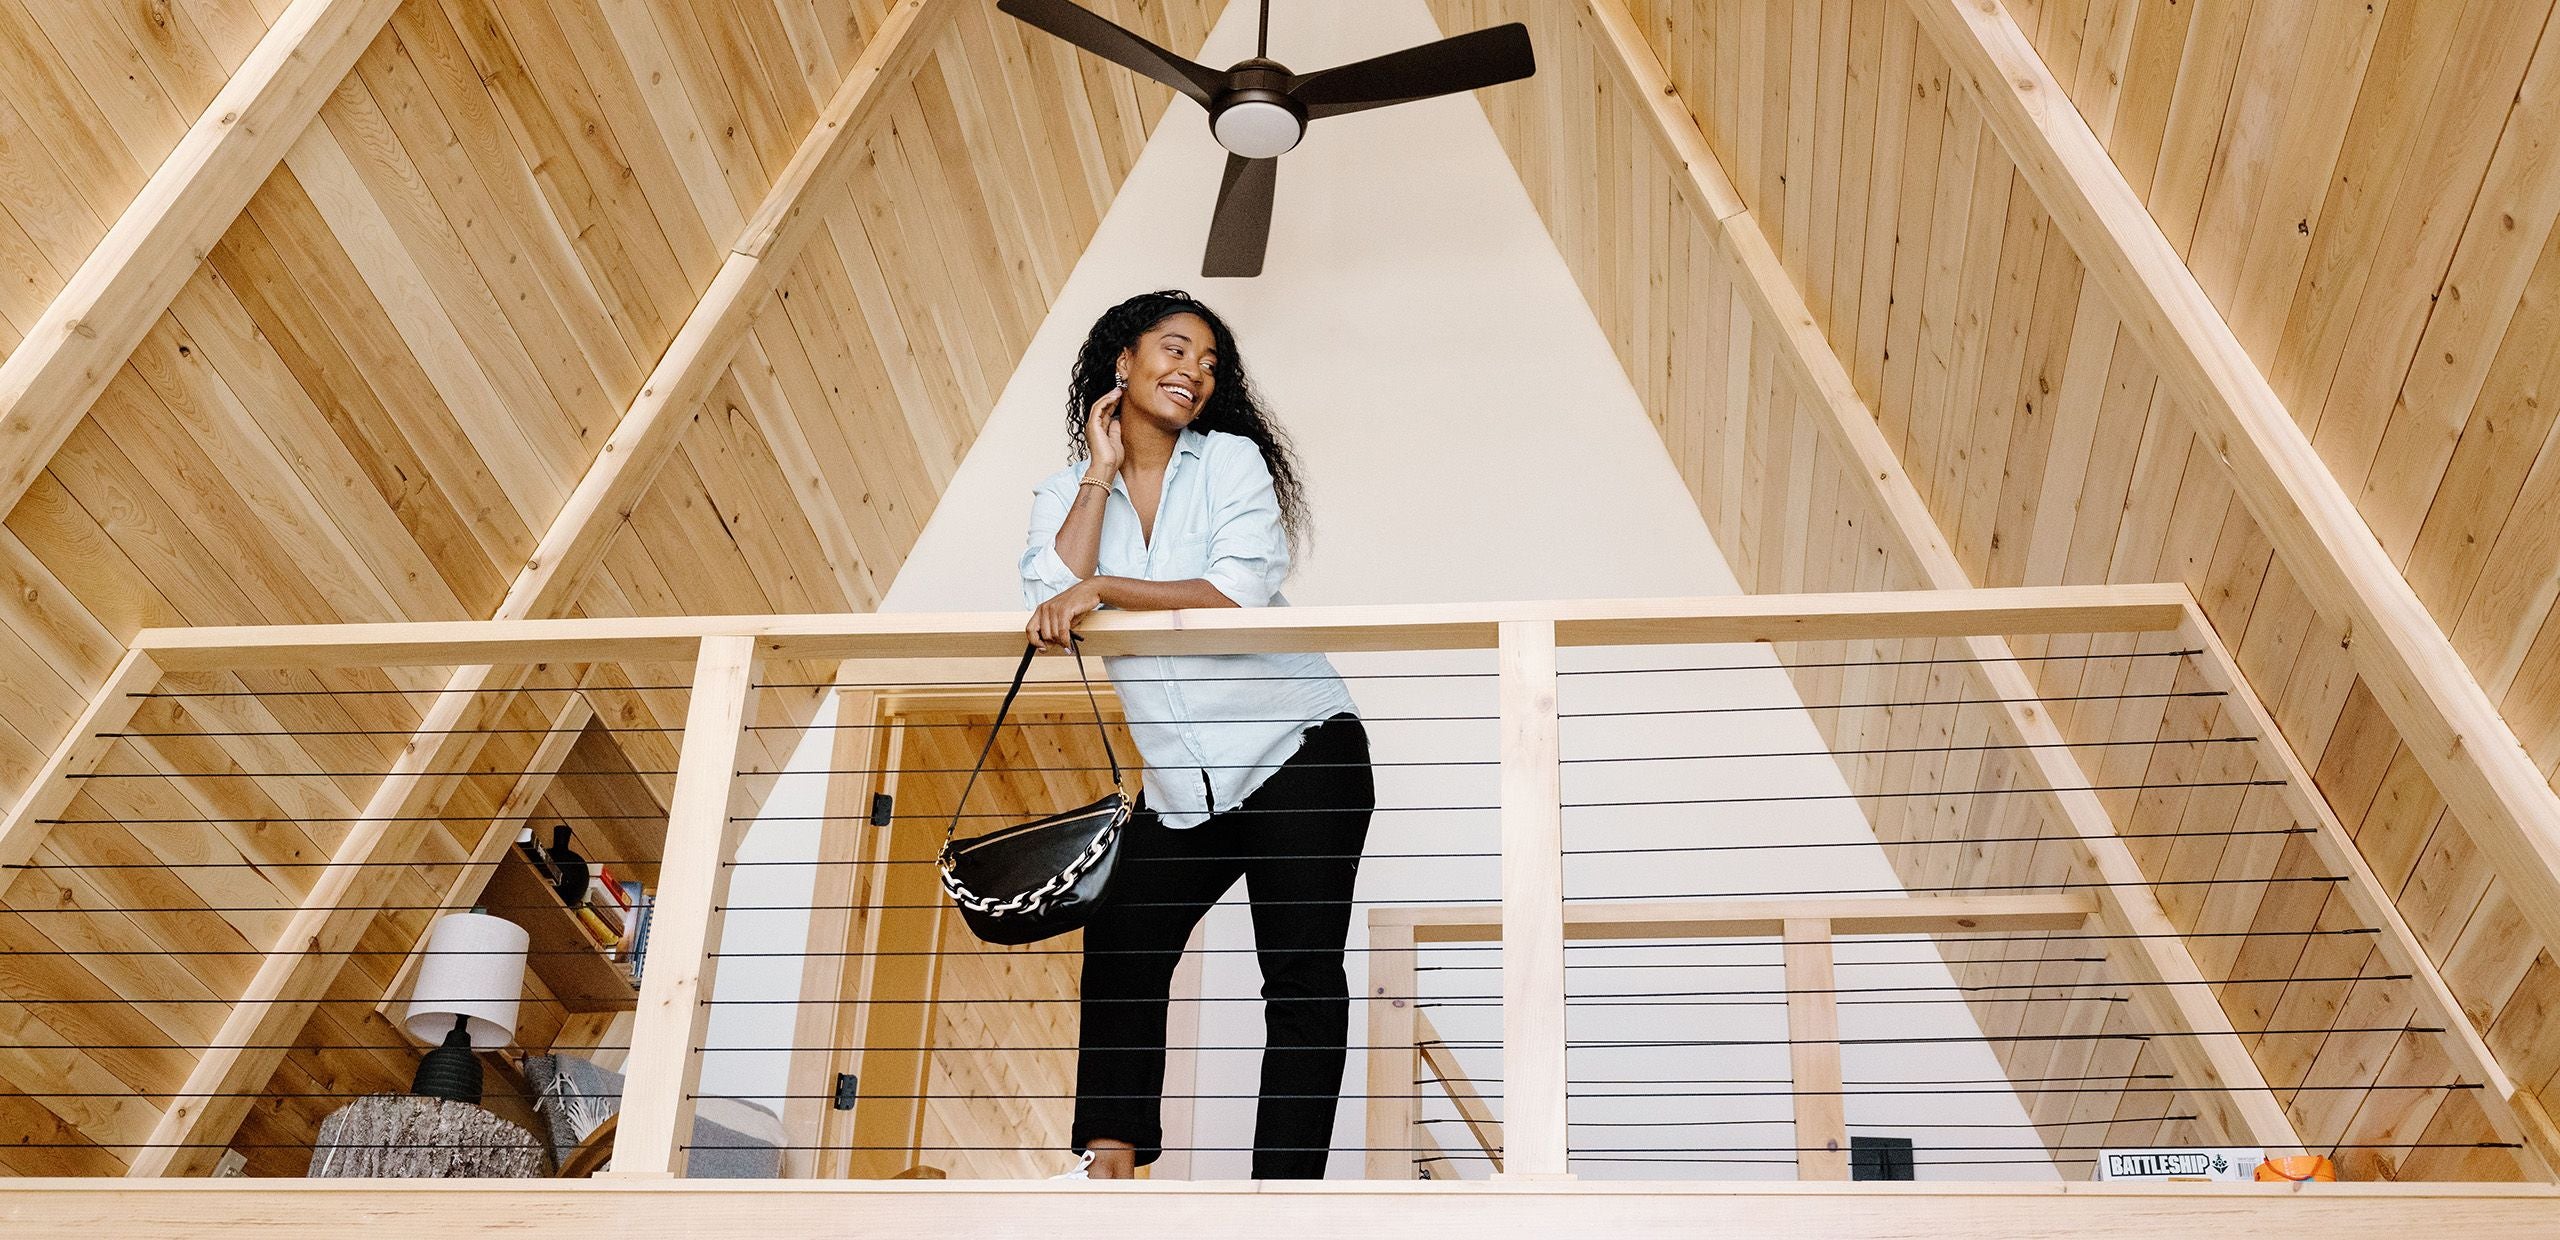 A woman leaning on the railing of a loft with a wooden ceiling and a fan above.